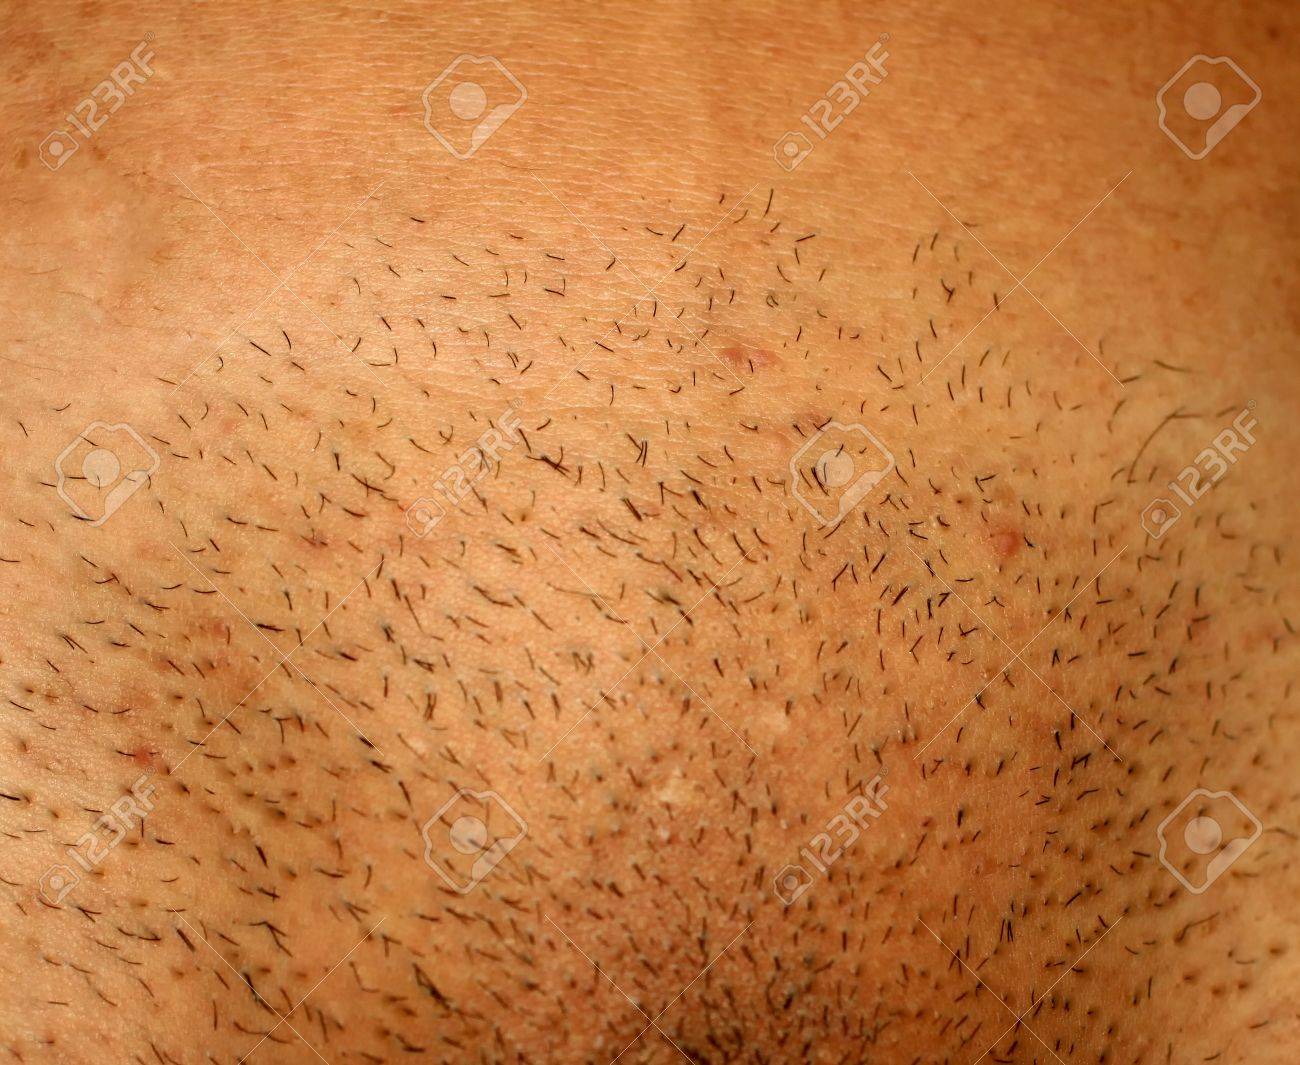 Images of shaved pubis